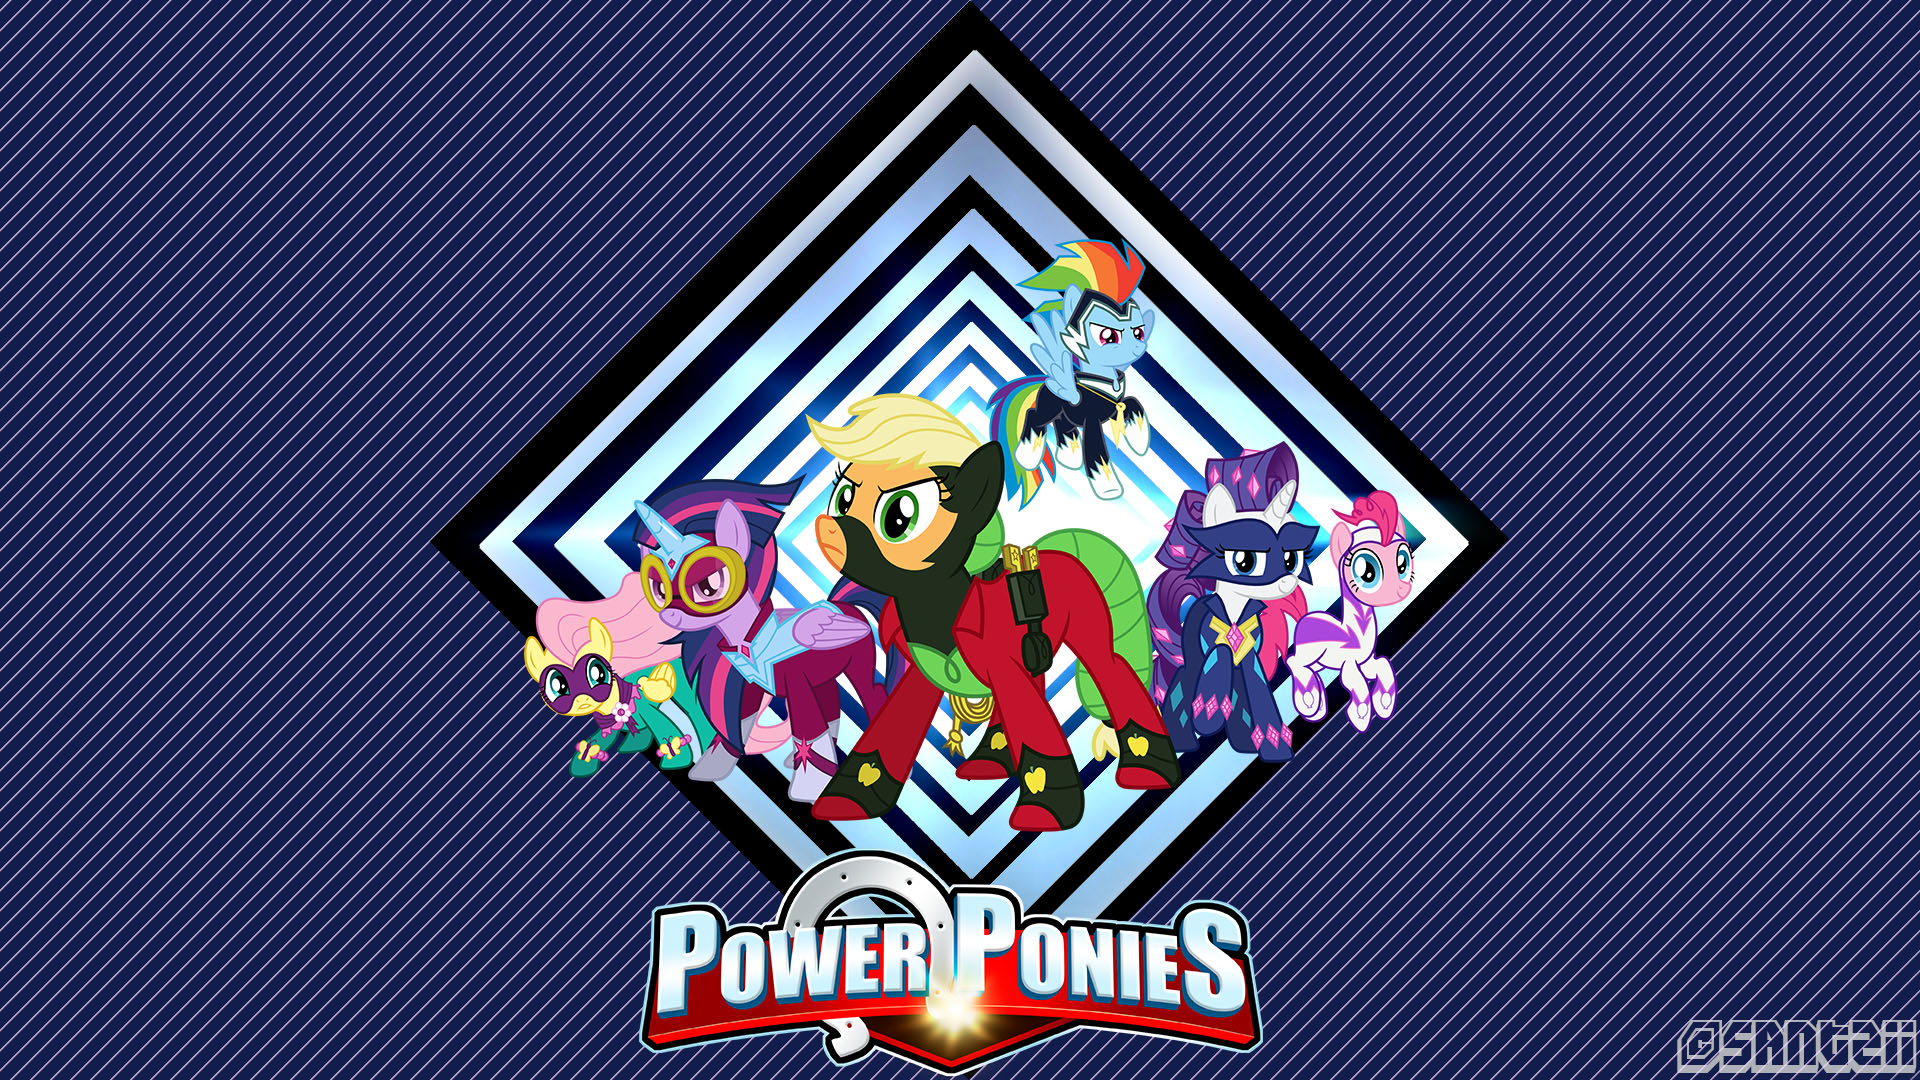 Power-Ponies wallpaper (w. text) by kingzbr and Santzii